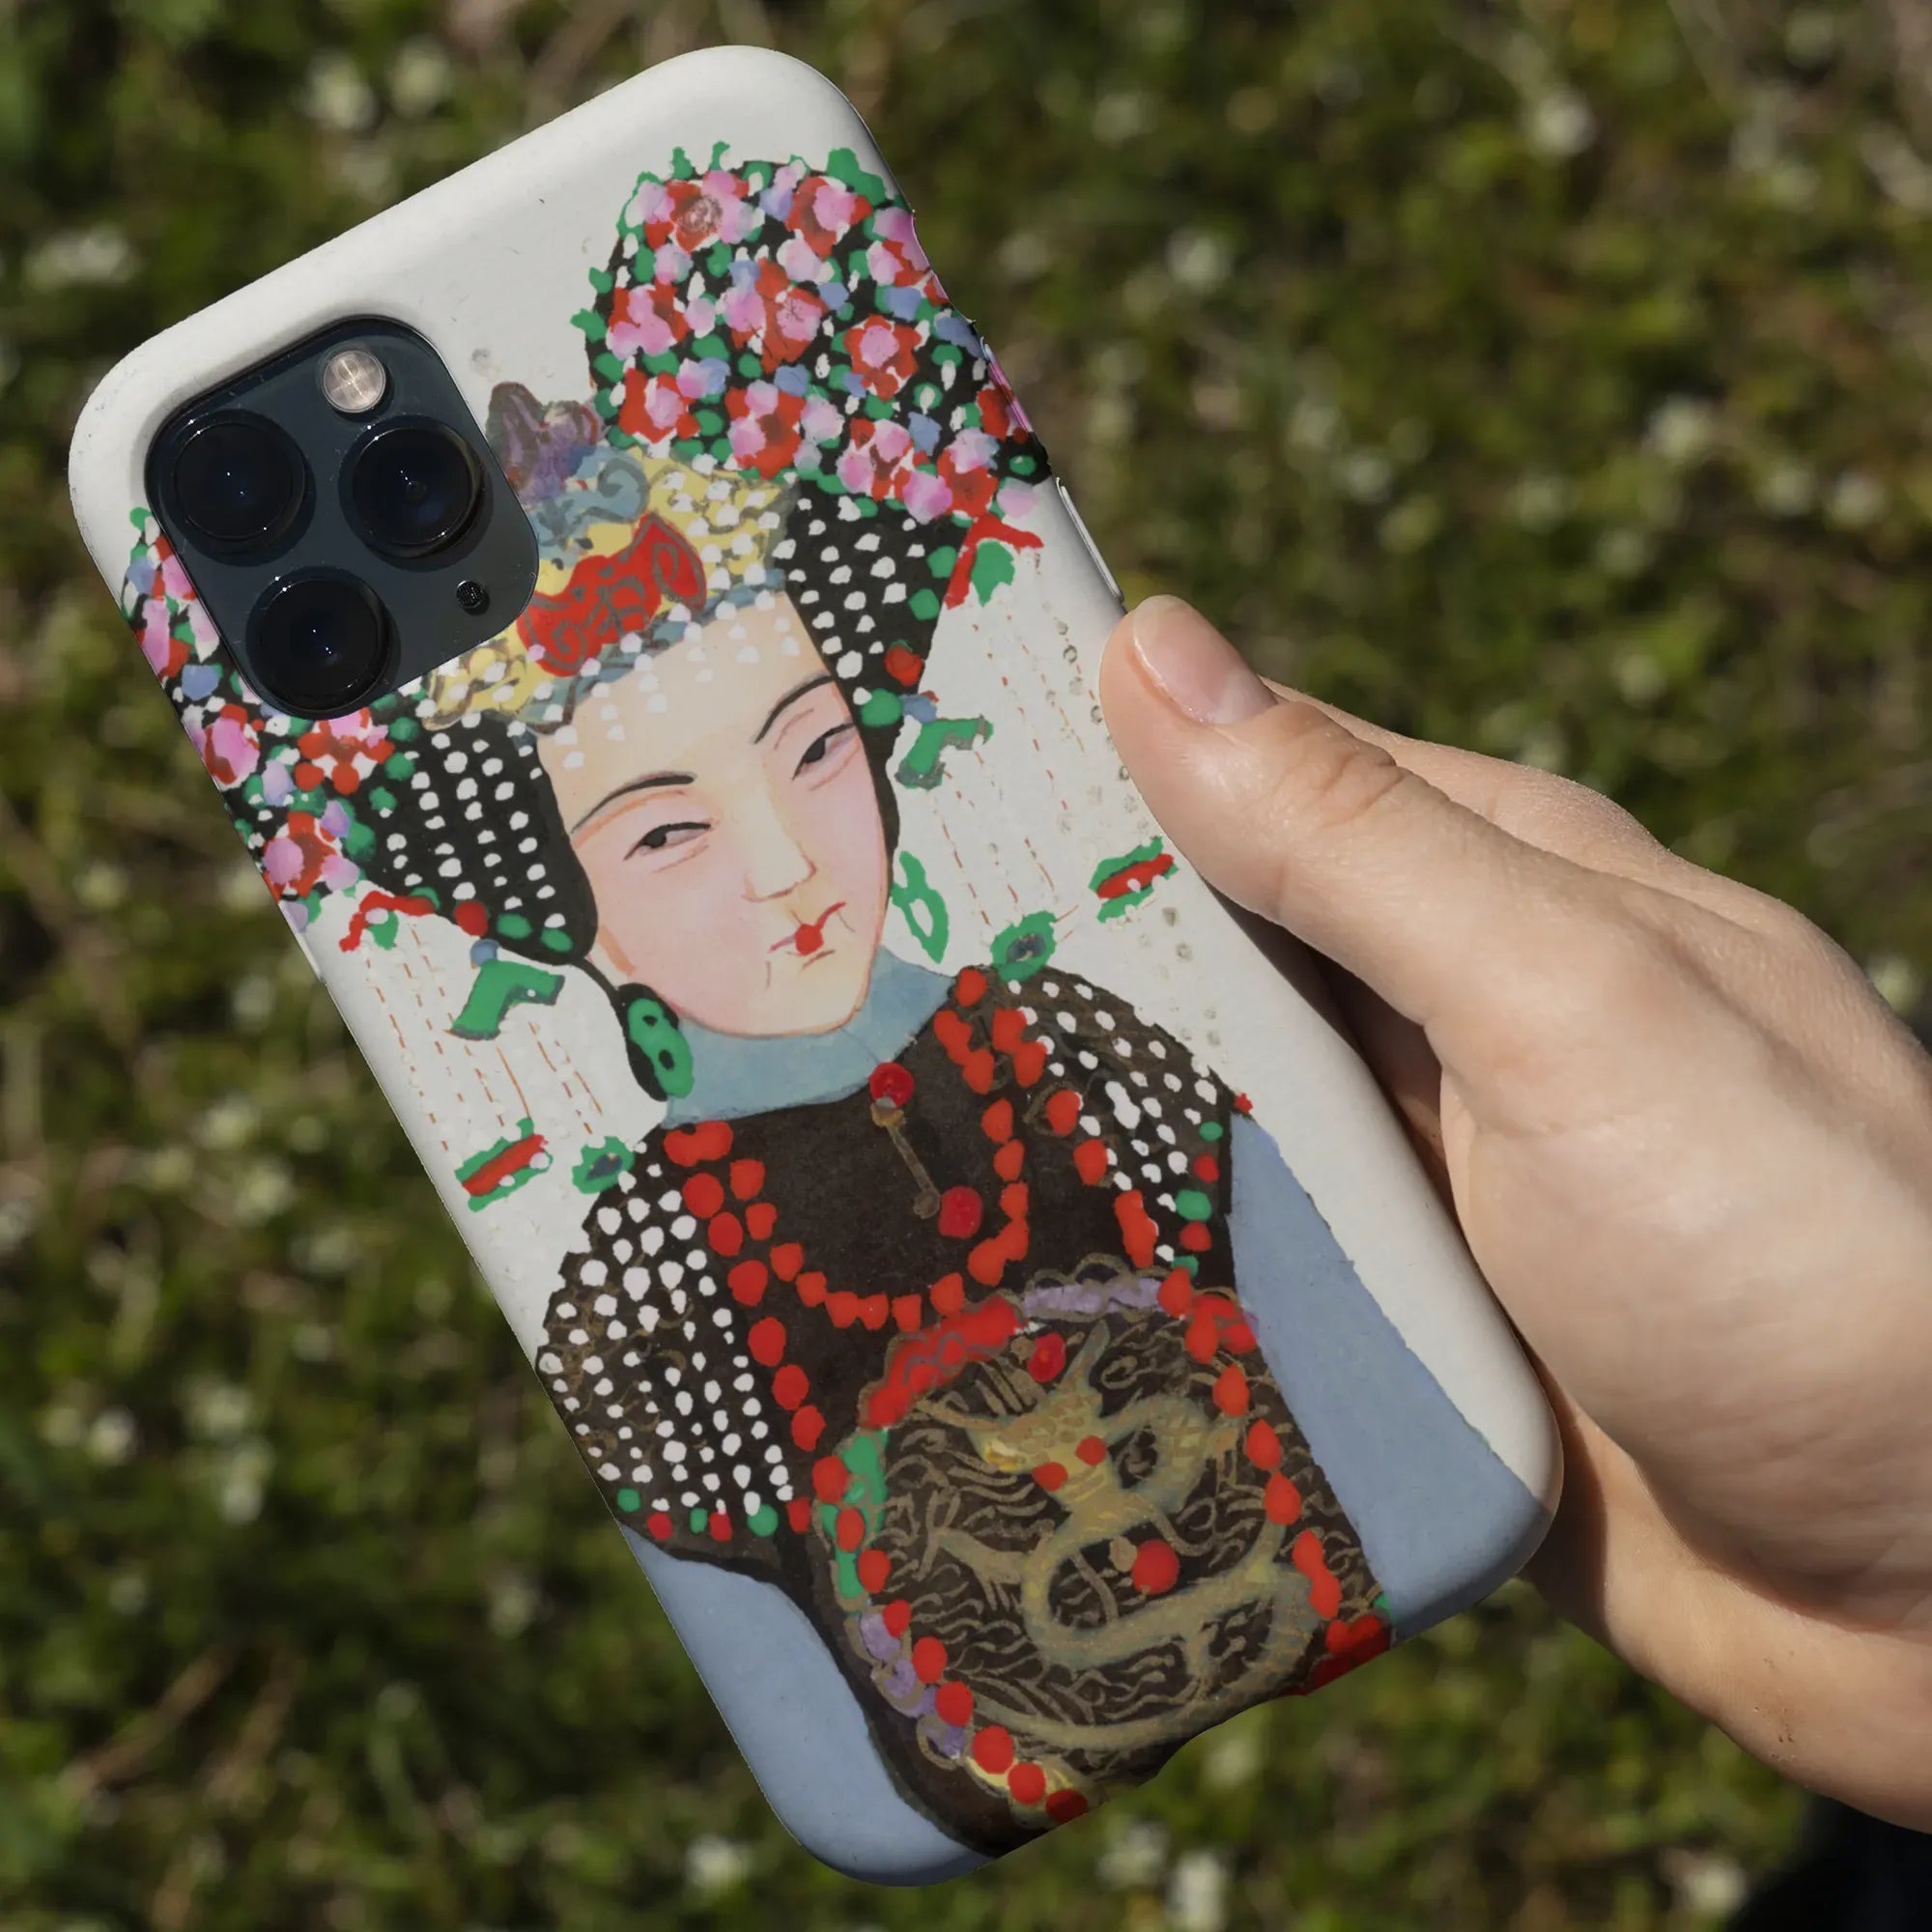 Chinese Empress - Manchu Art Phone Case - Mobile Phone Cases - Aesthetic Art